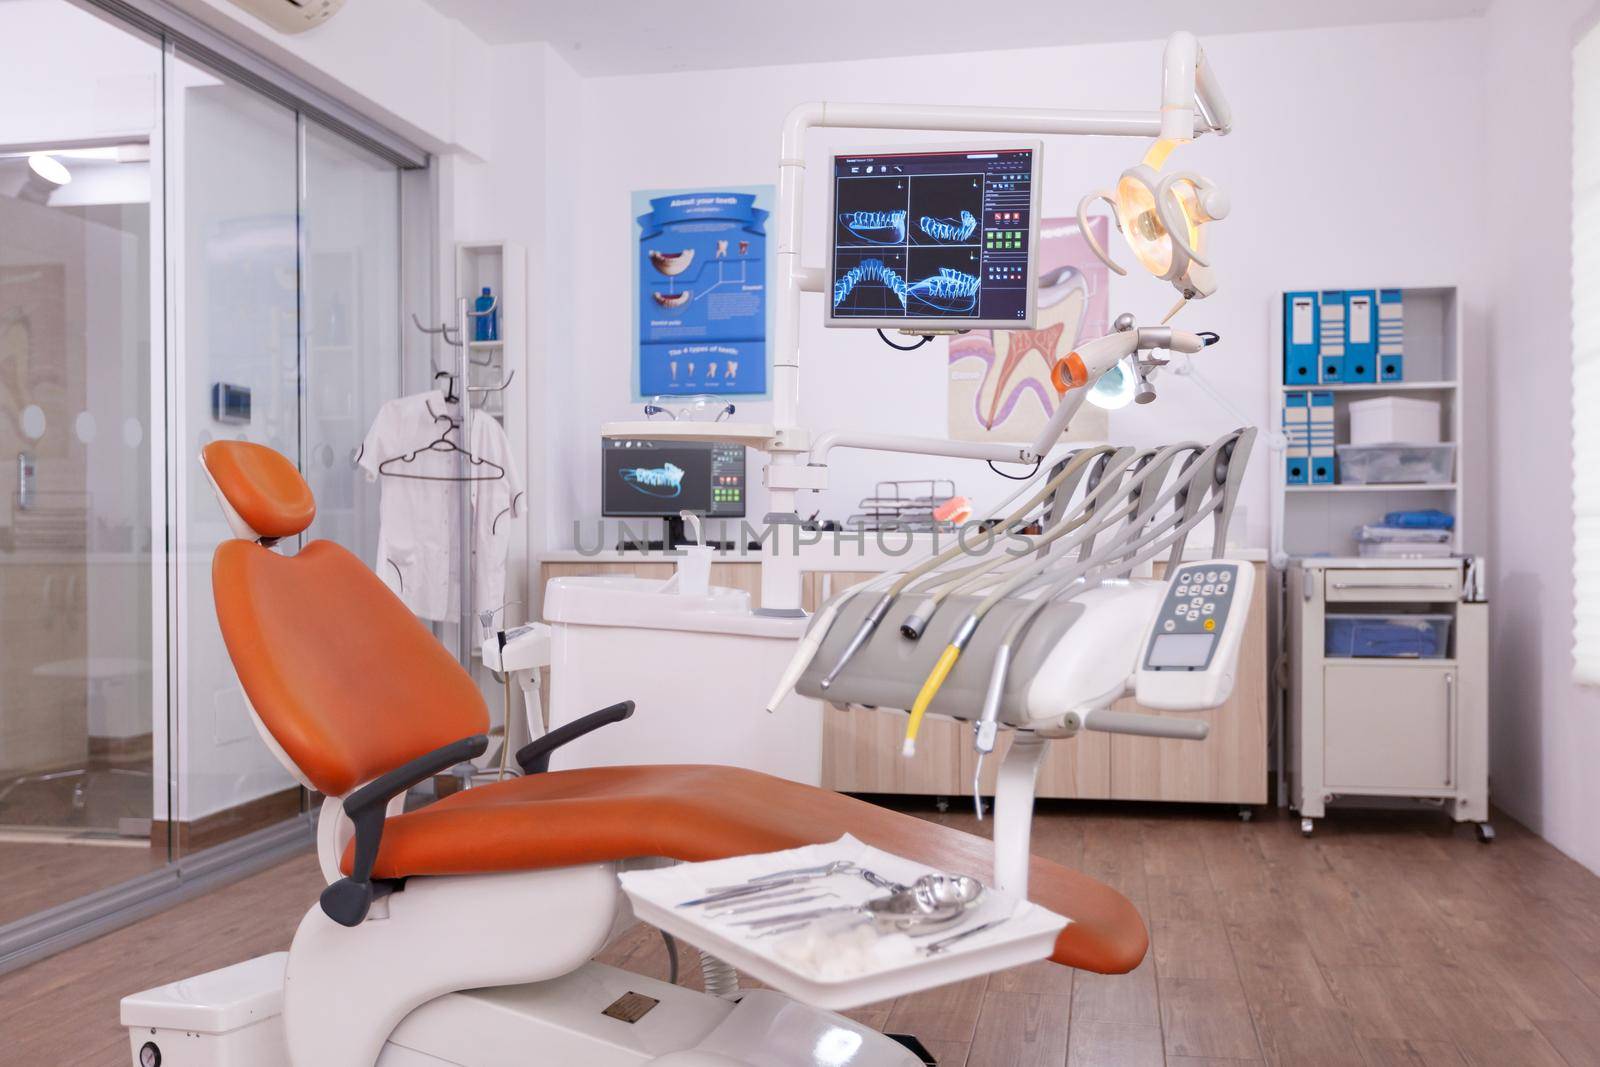 Interior of empty professional dental health office in hospital with stomatology dentistry furniture. Medical workplace cabinet for dental teeth health. Tooth radiography images on monitor